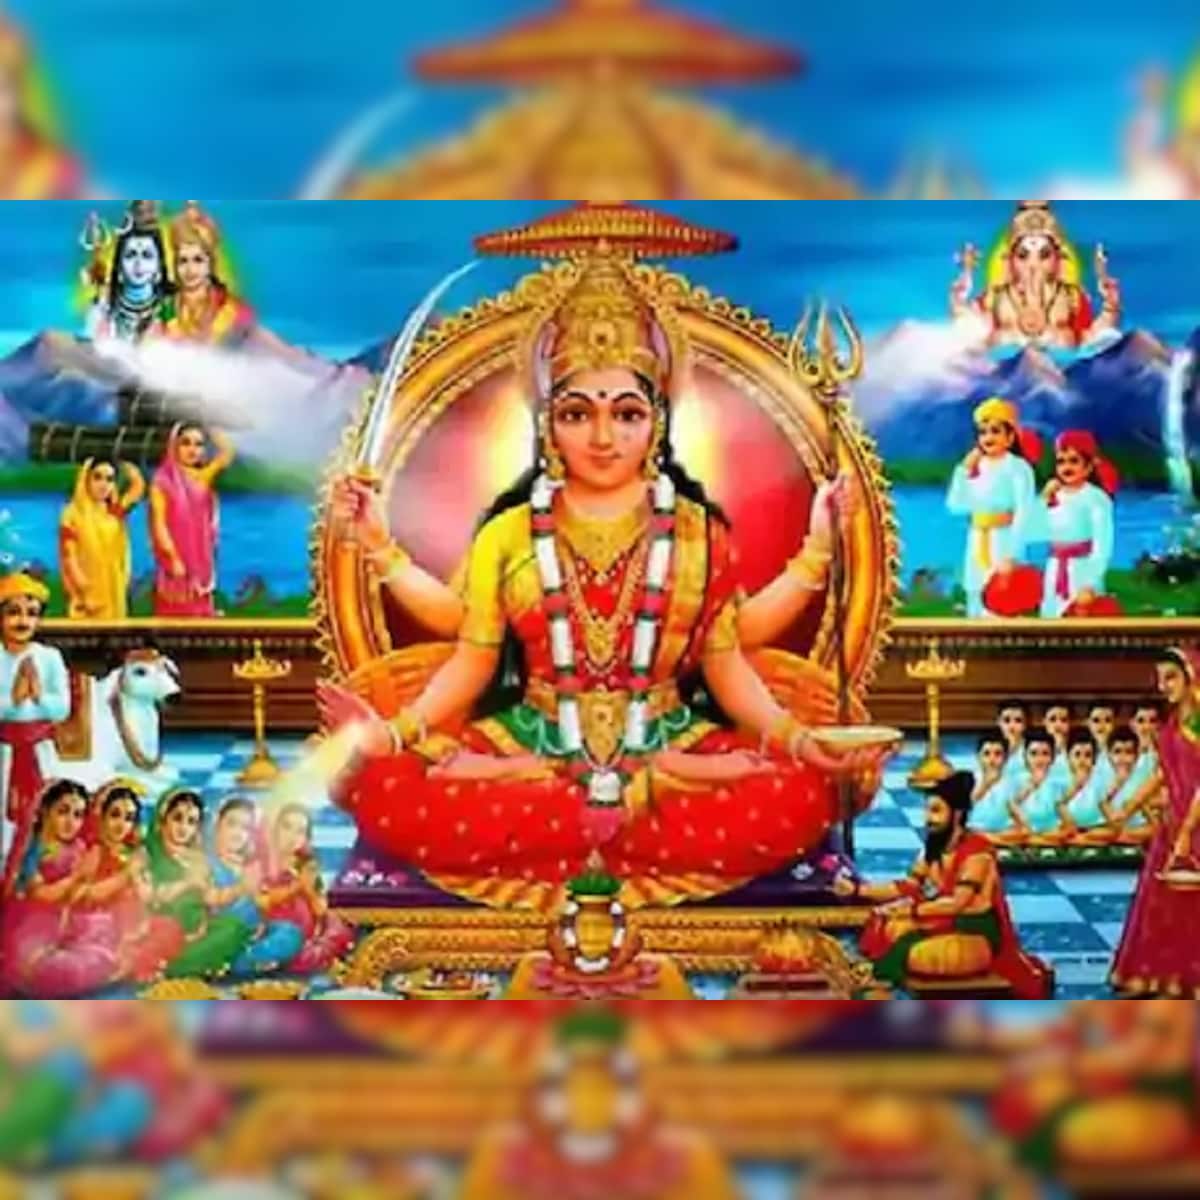 An Incredible Compilation of 999+ Santoshi Mata Images in Stunning 4K Resolution